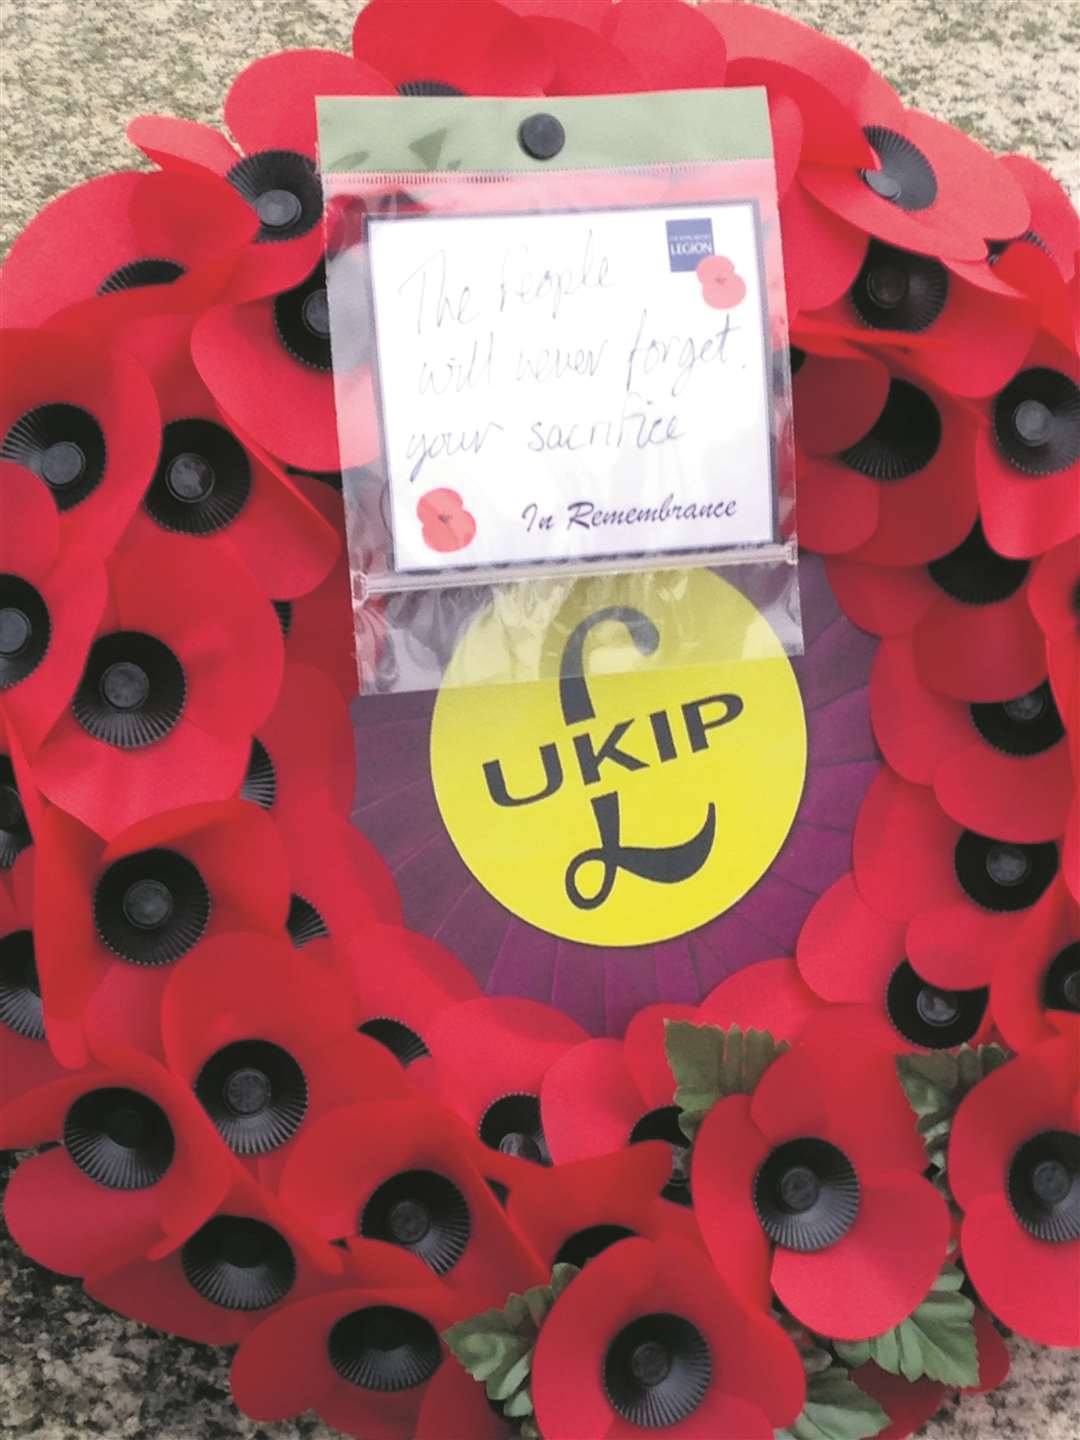 Some were angry after a wreath was laid with the Ukip logo in the centre